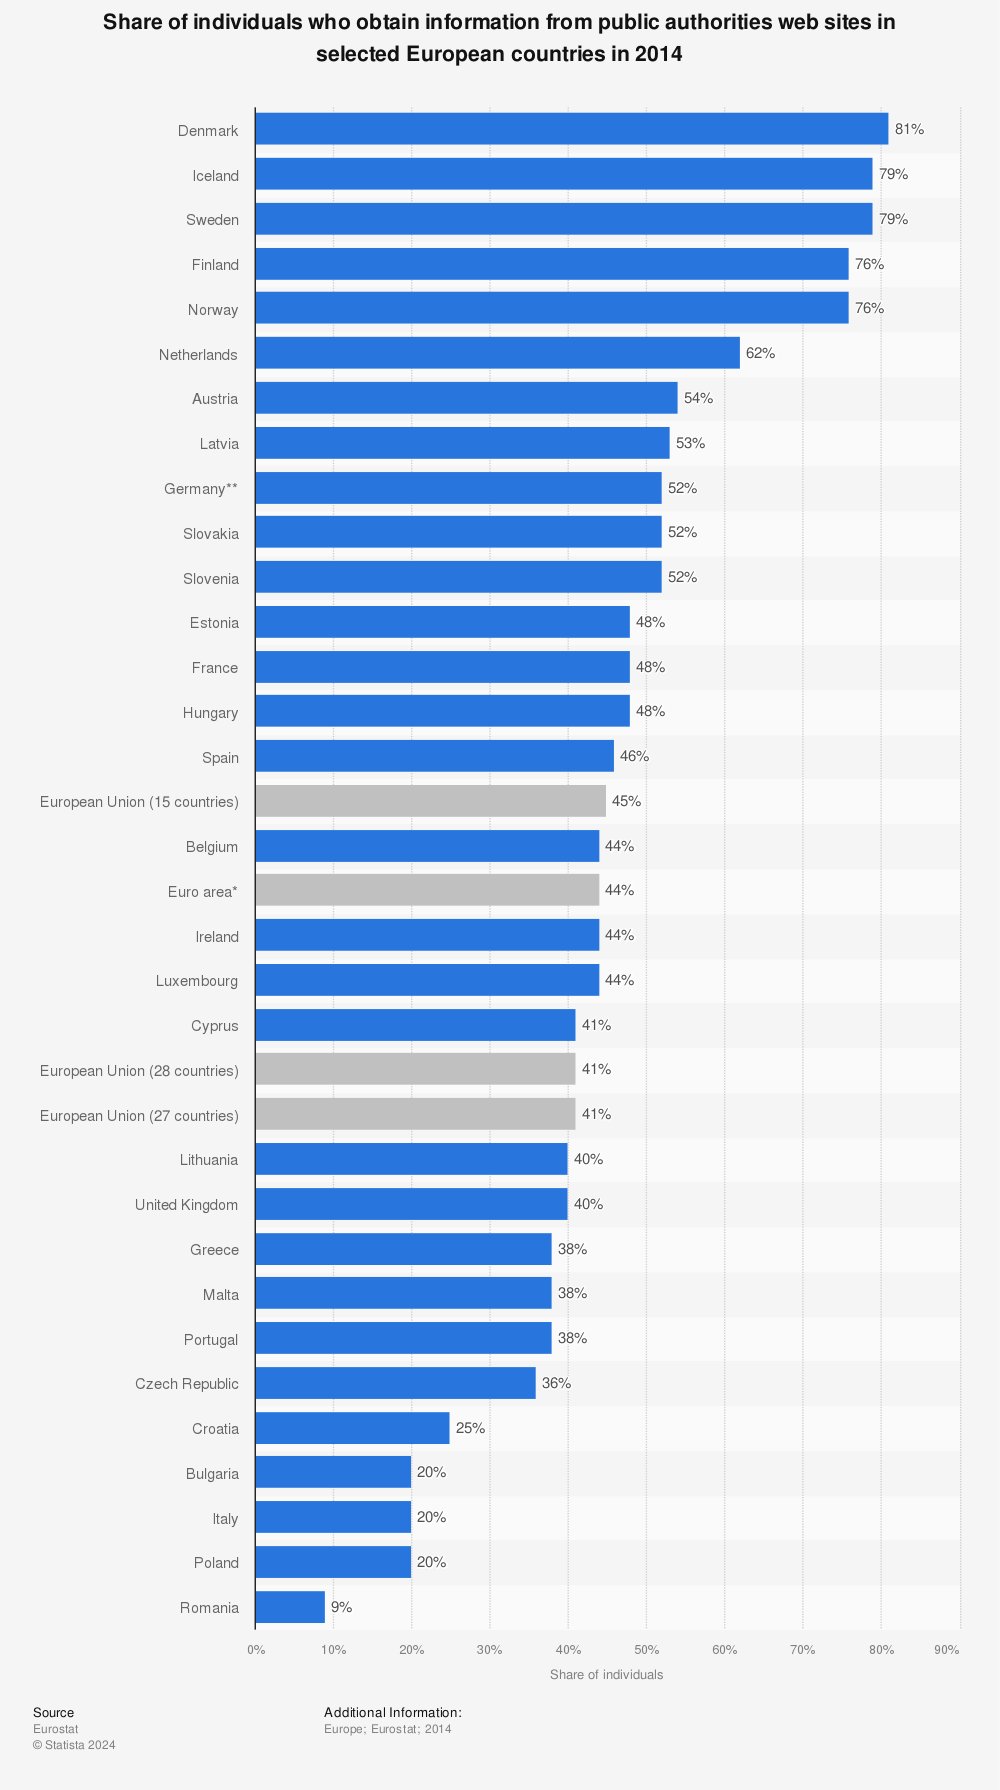 Statistic: Share of individuals who obtain information from public authorities web sites in selected European countries in 2014 | Statista